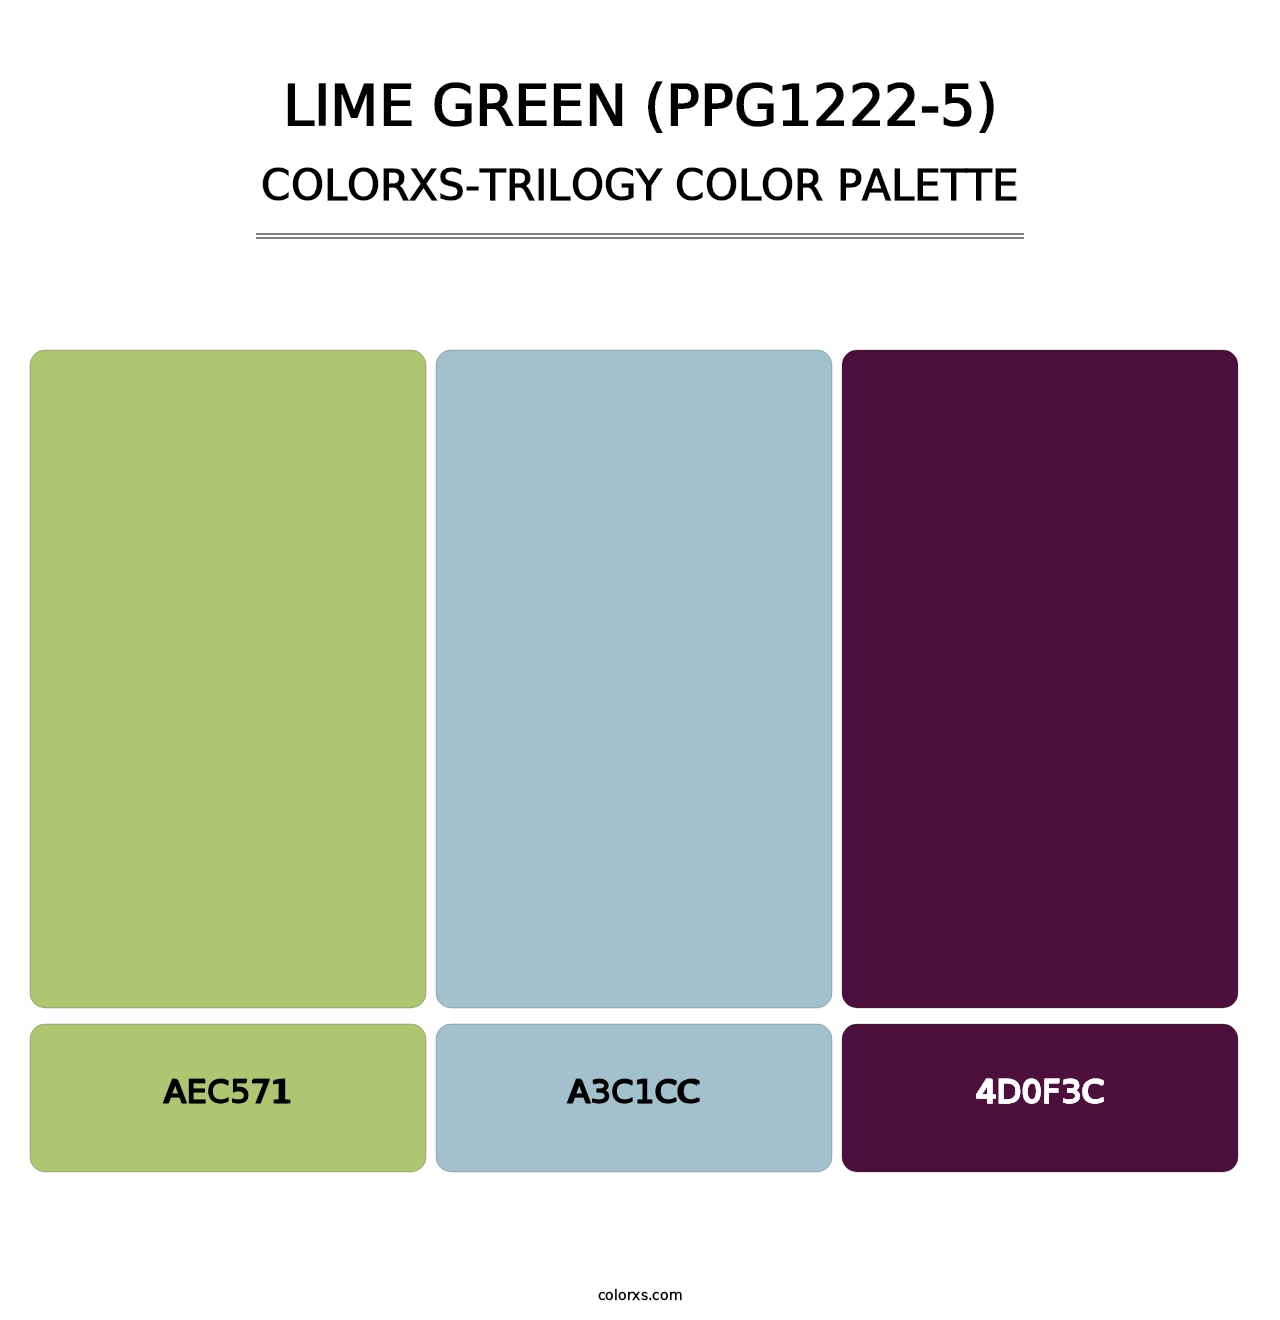 Lime Green (PPG1222-5) - Colorxs Trilogy Palette